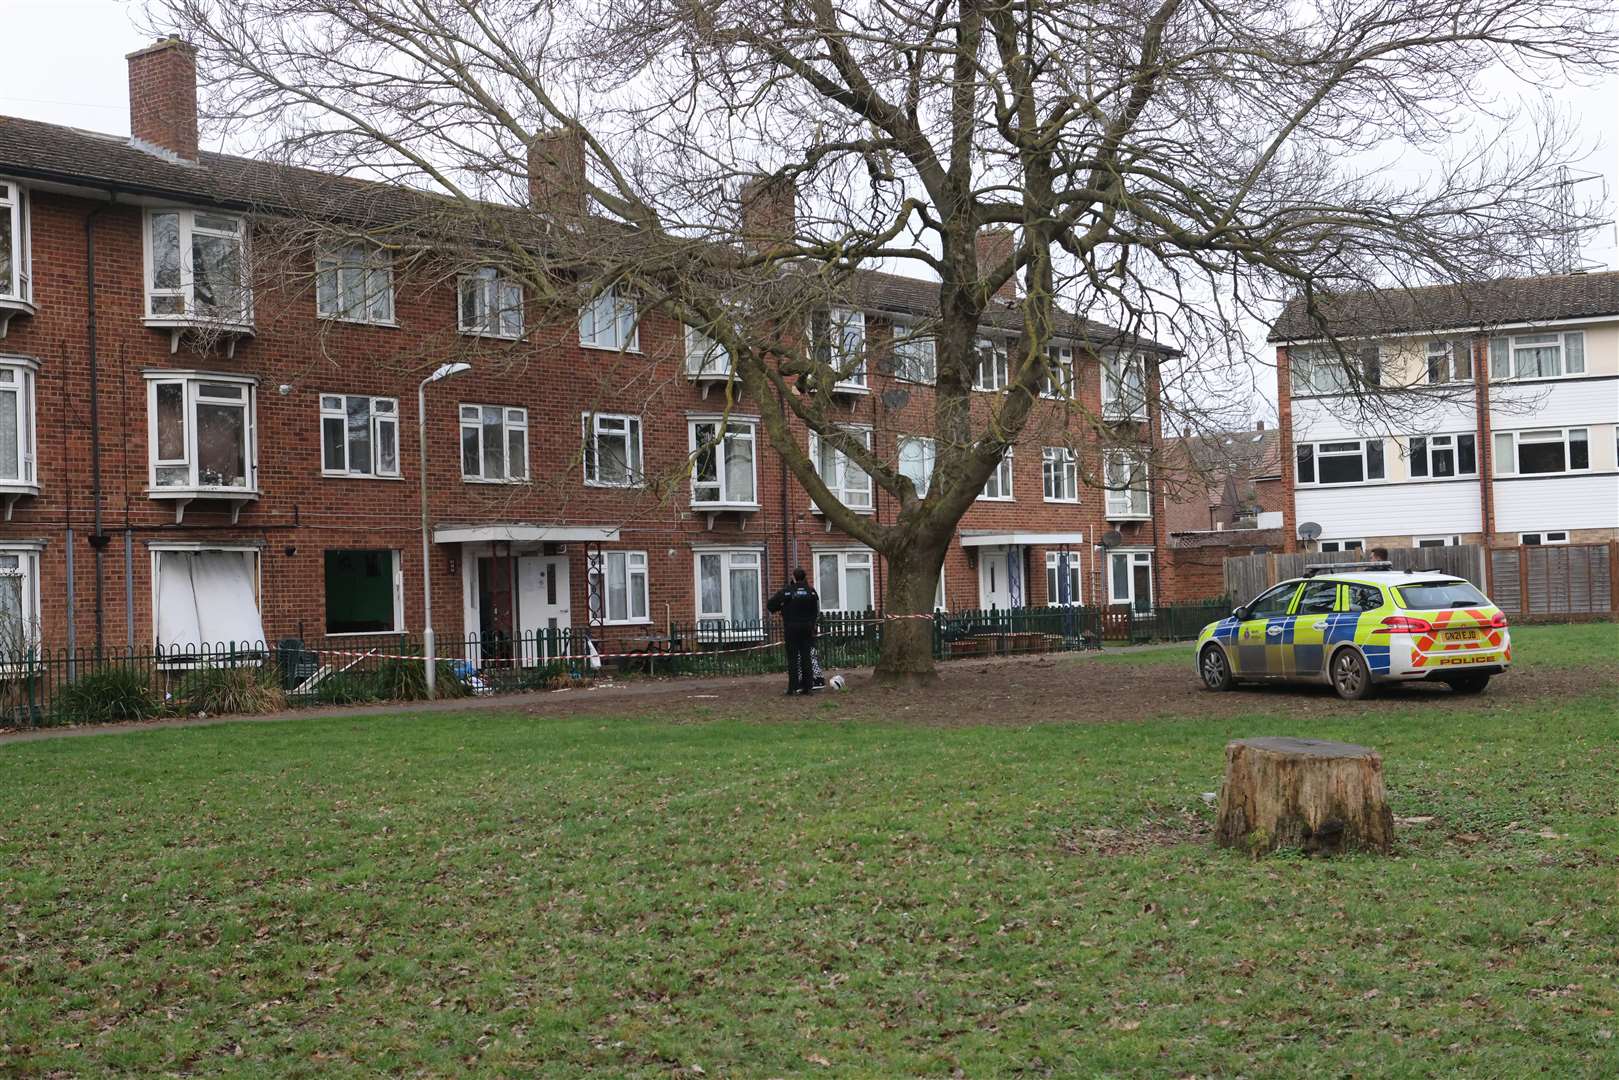 Police and fire crews have been called to reports of an explosion at a flat in Catlyn Close, East Malling. Photo: UKNIP